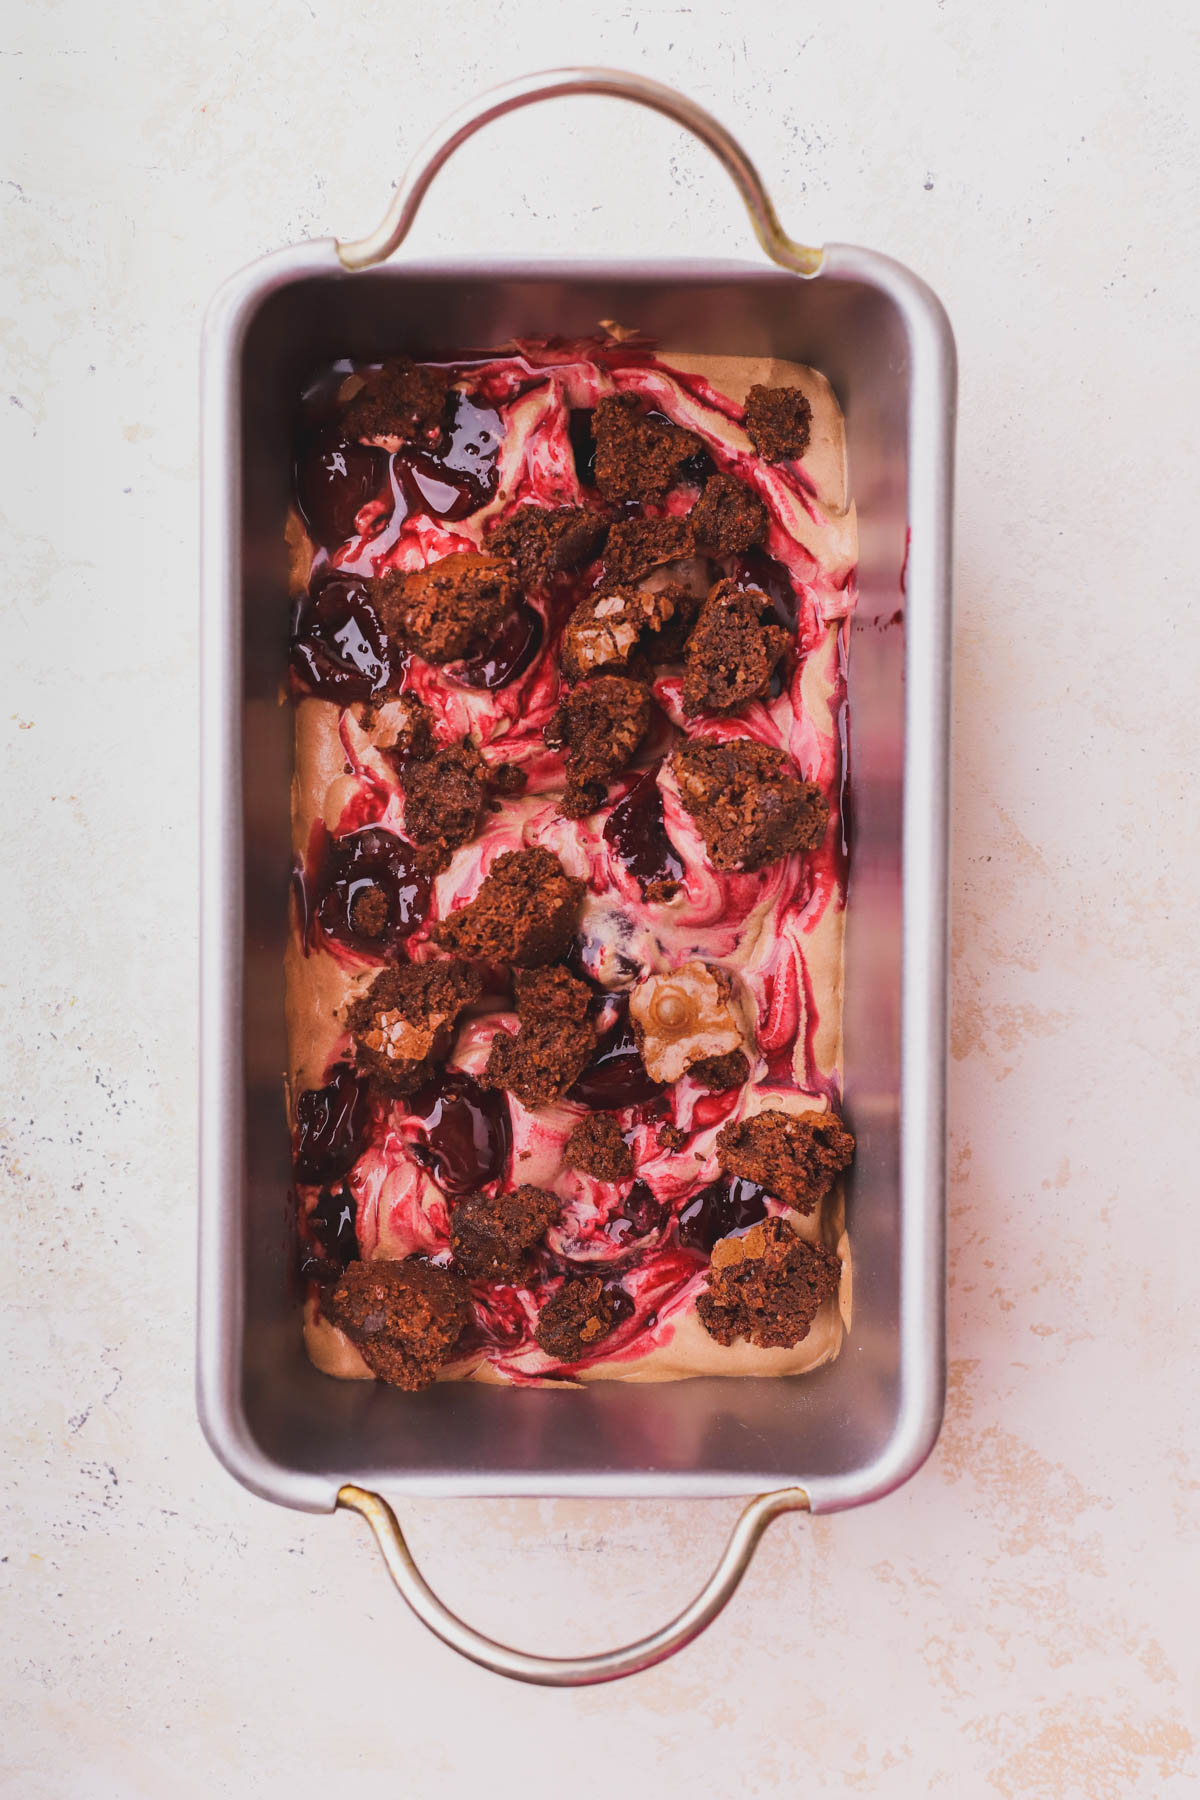 Chocolate ice cream, brownie pieces and cherry compote. 